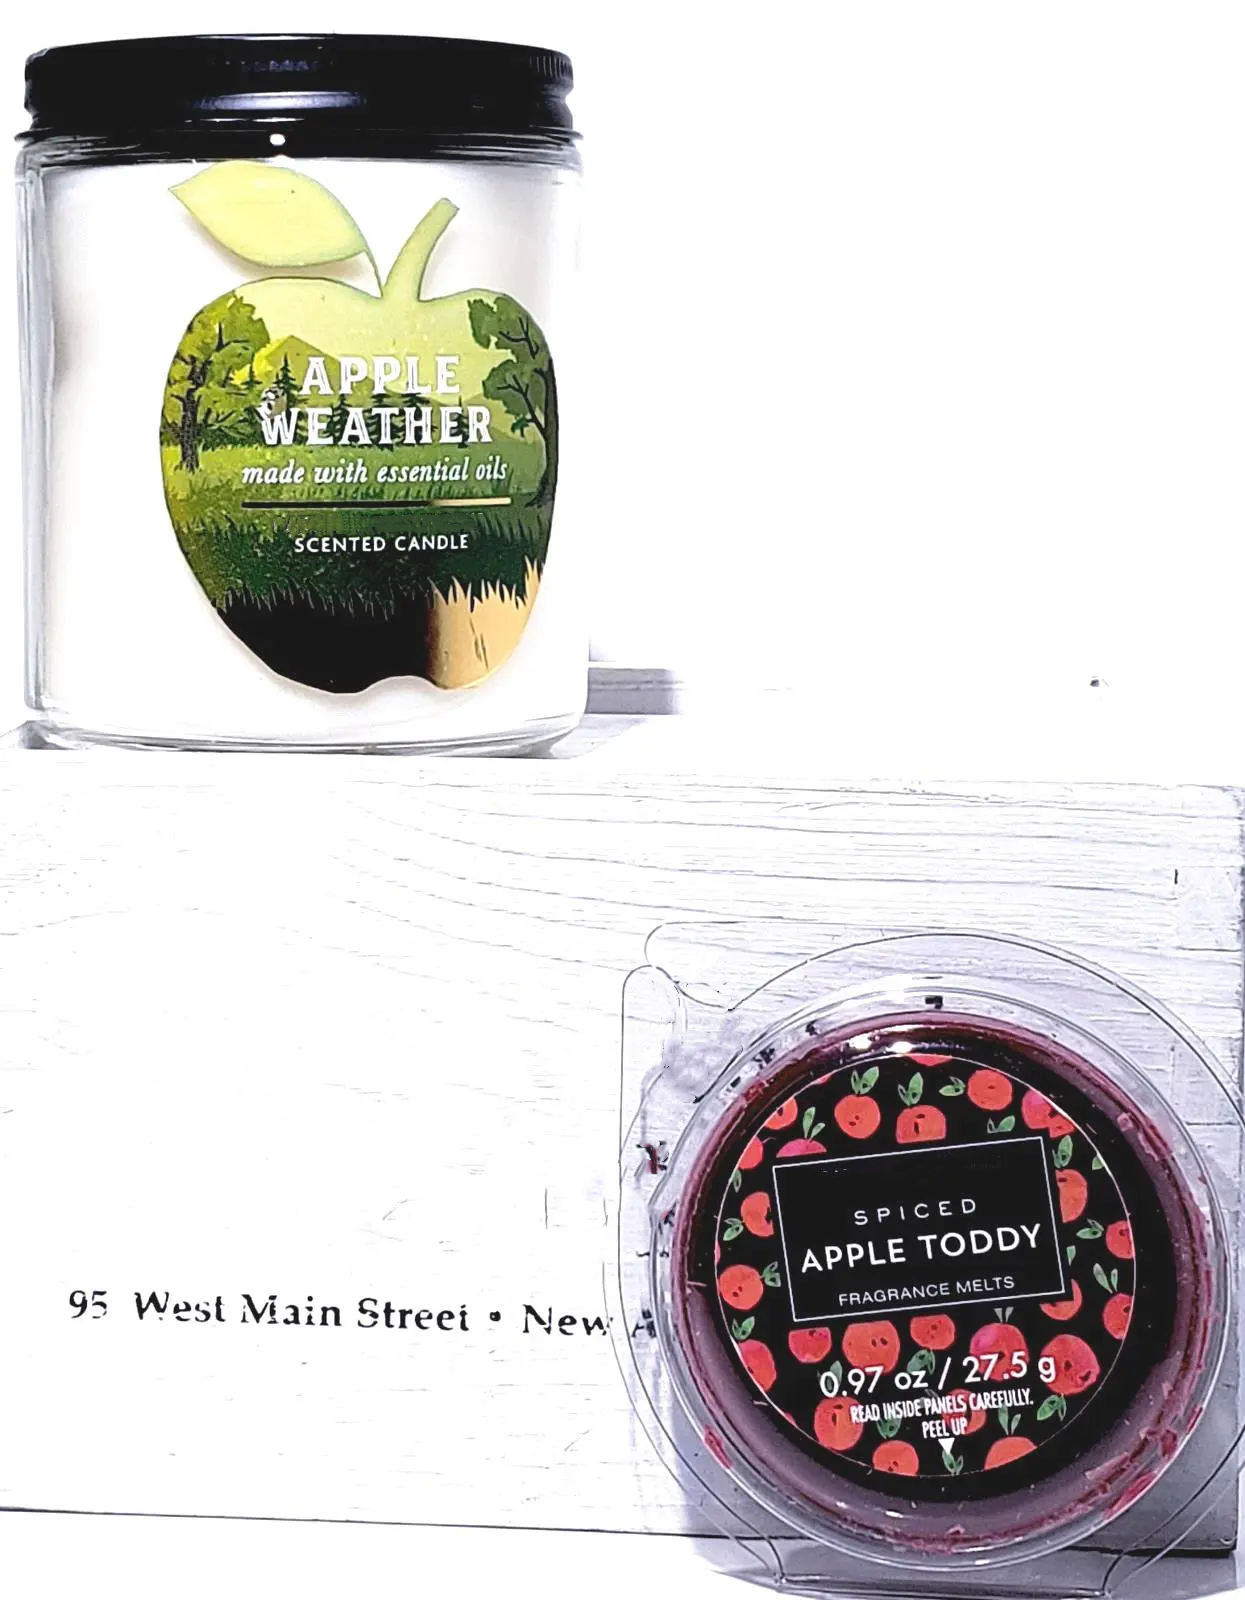 Apple Weather Single Wick Candle, Spiced Apple Toddy Wax Melt